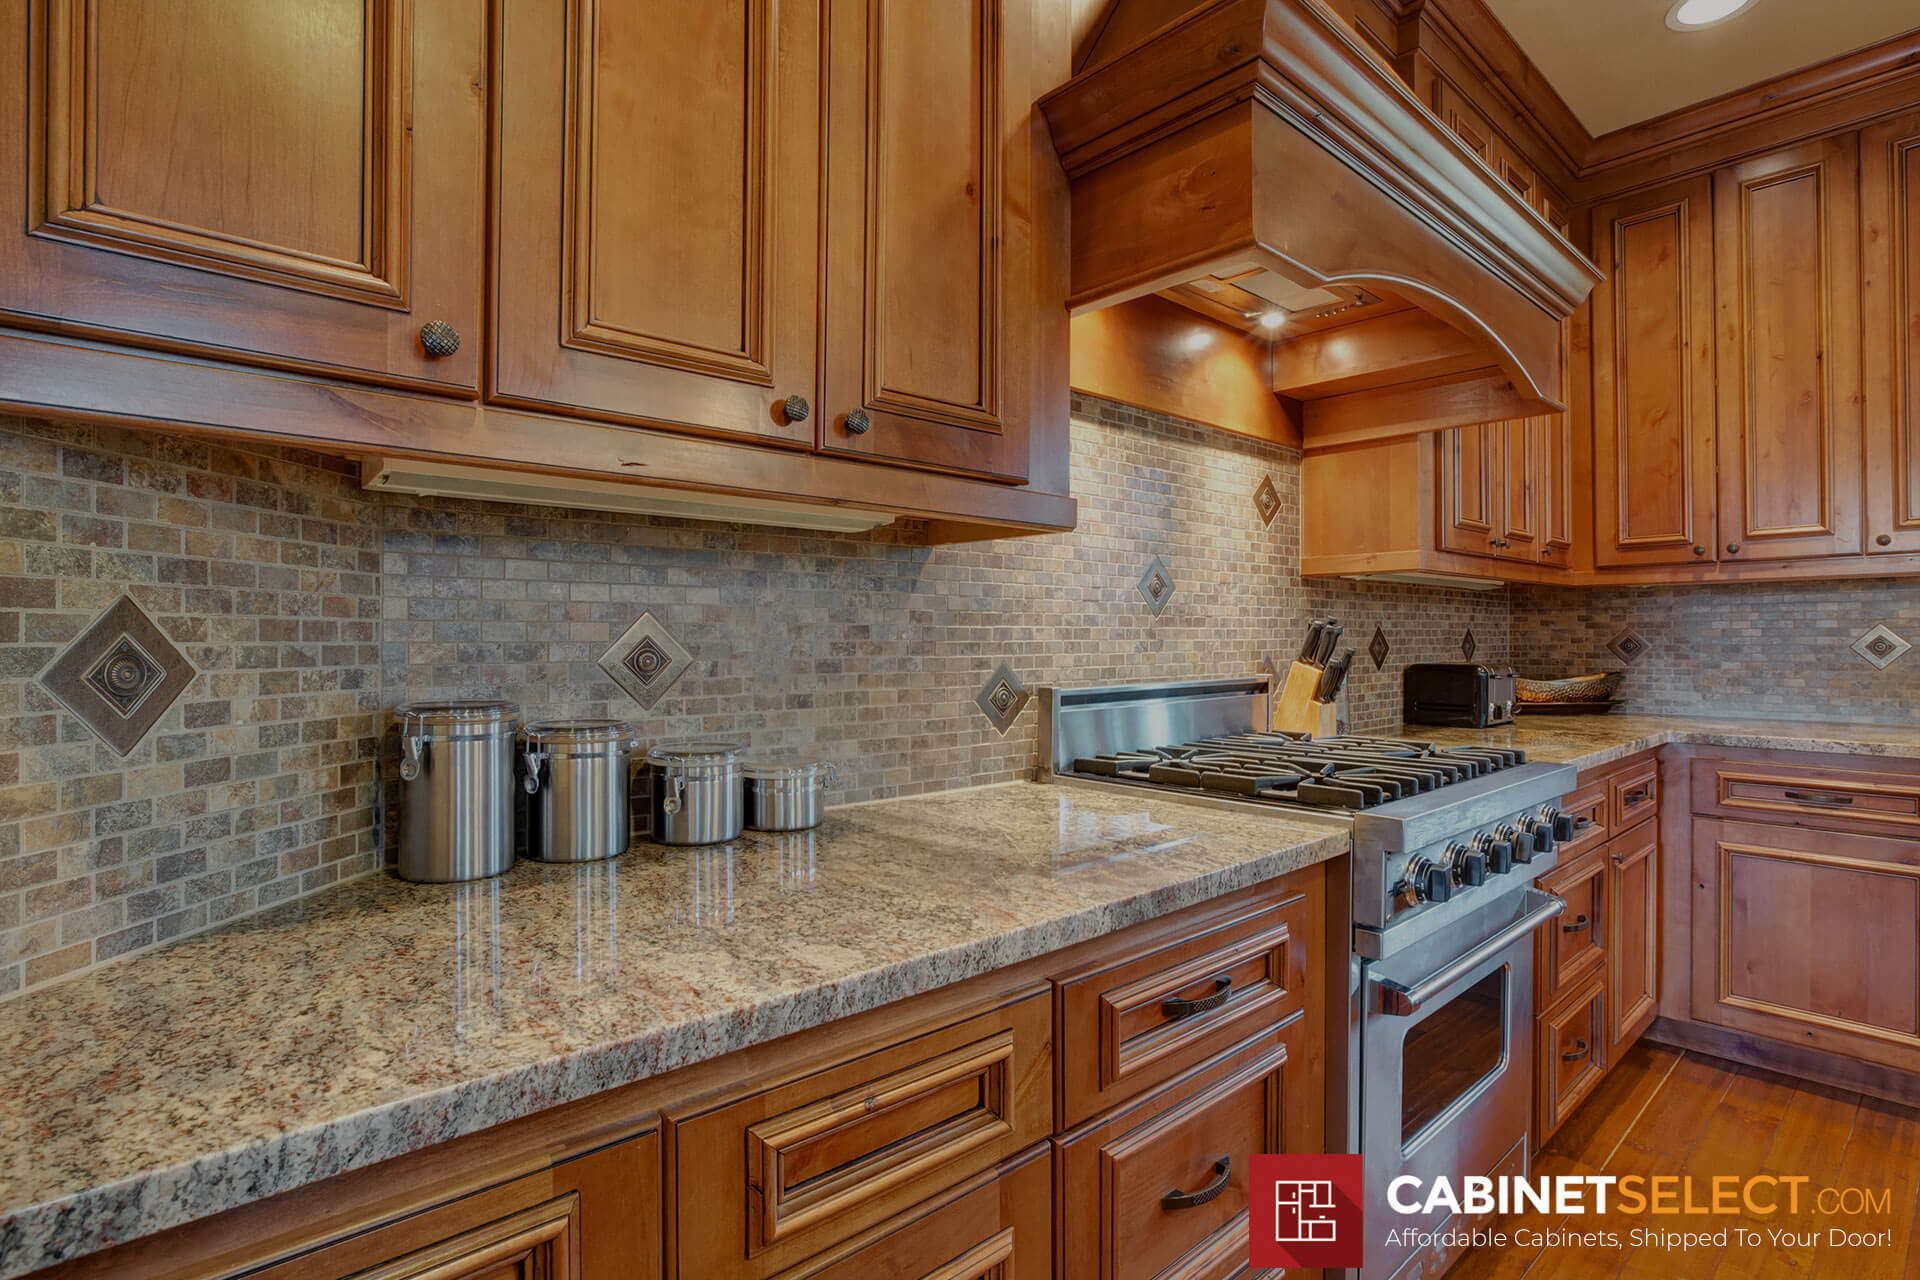 Affordable Rta Kitchen Cabinets Heres Why They Are A Smart